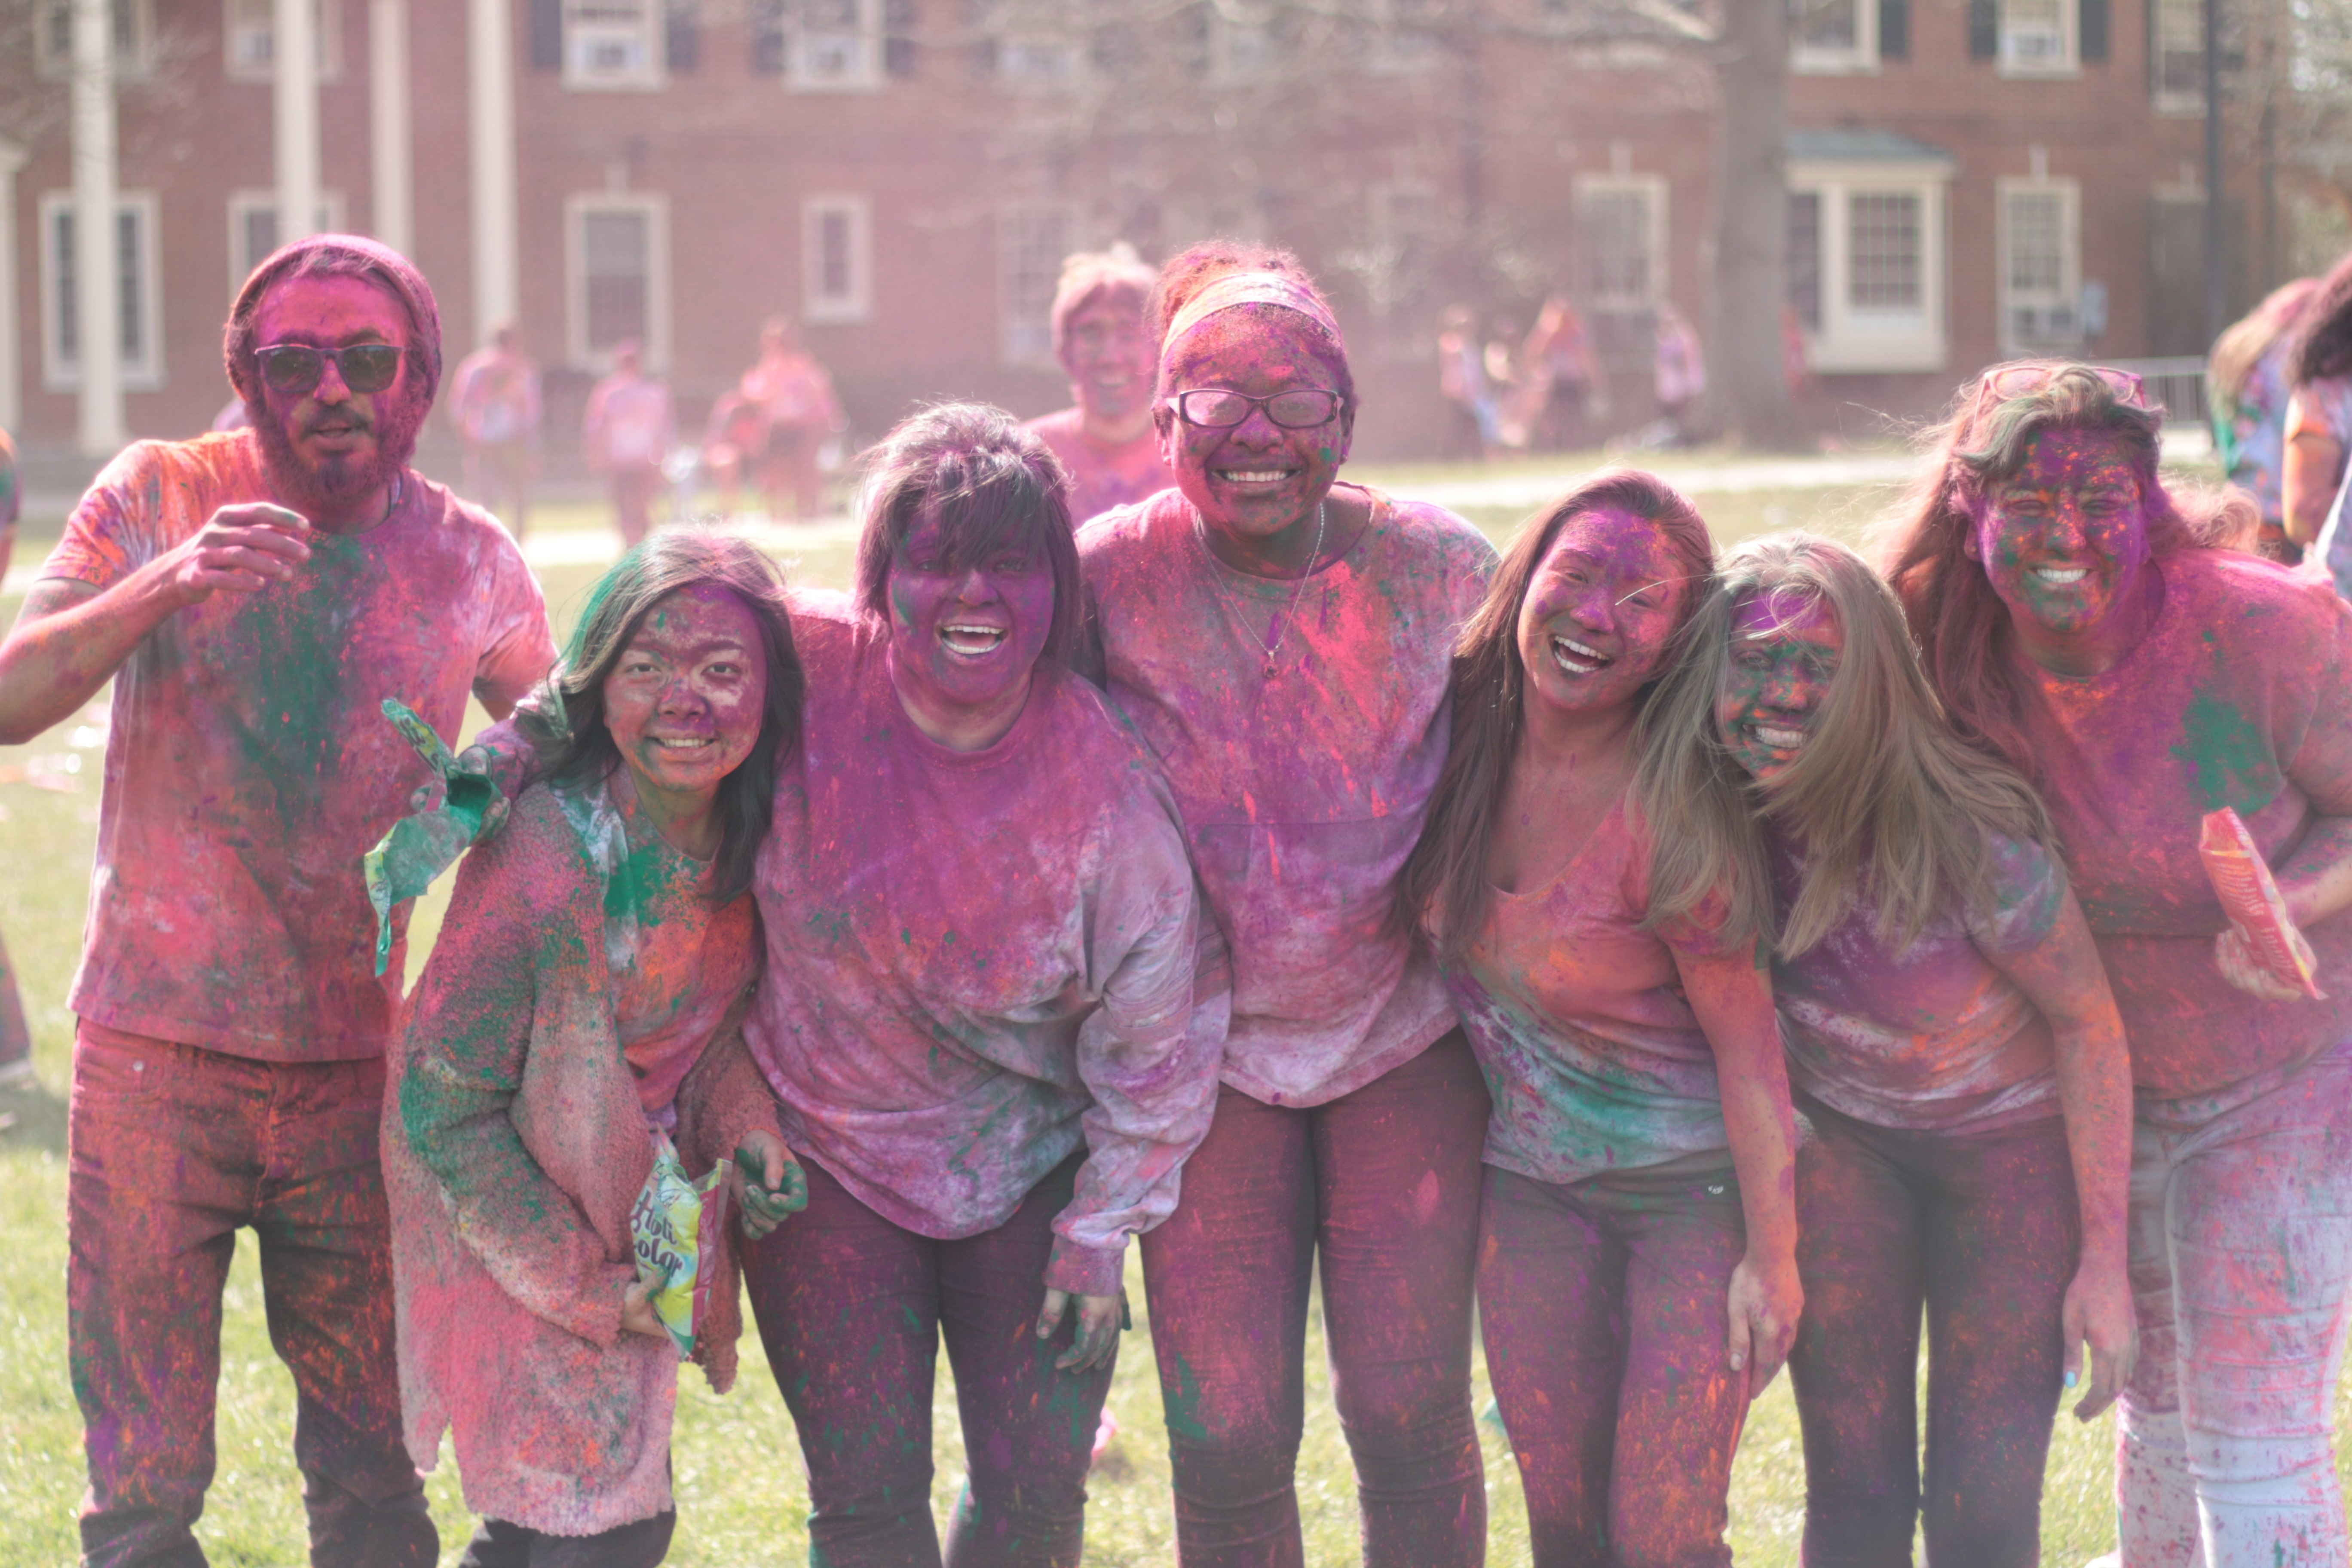 Angel and her friends celebrate Holi with a colorful celebration.